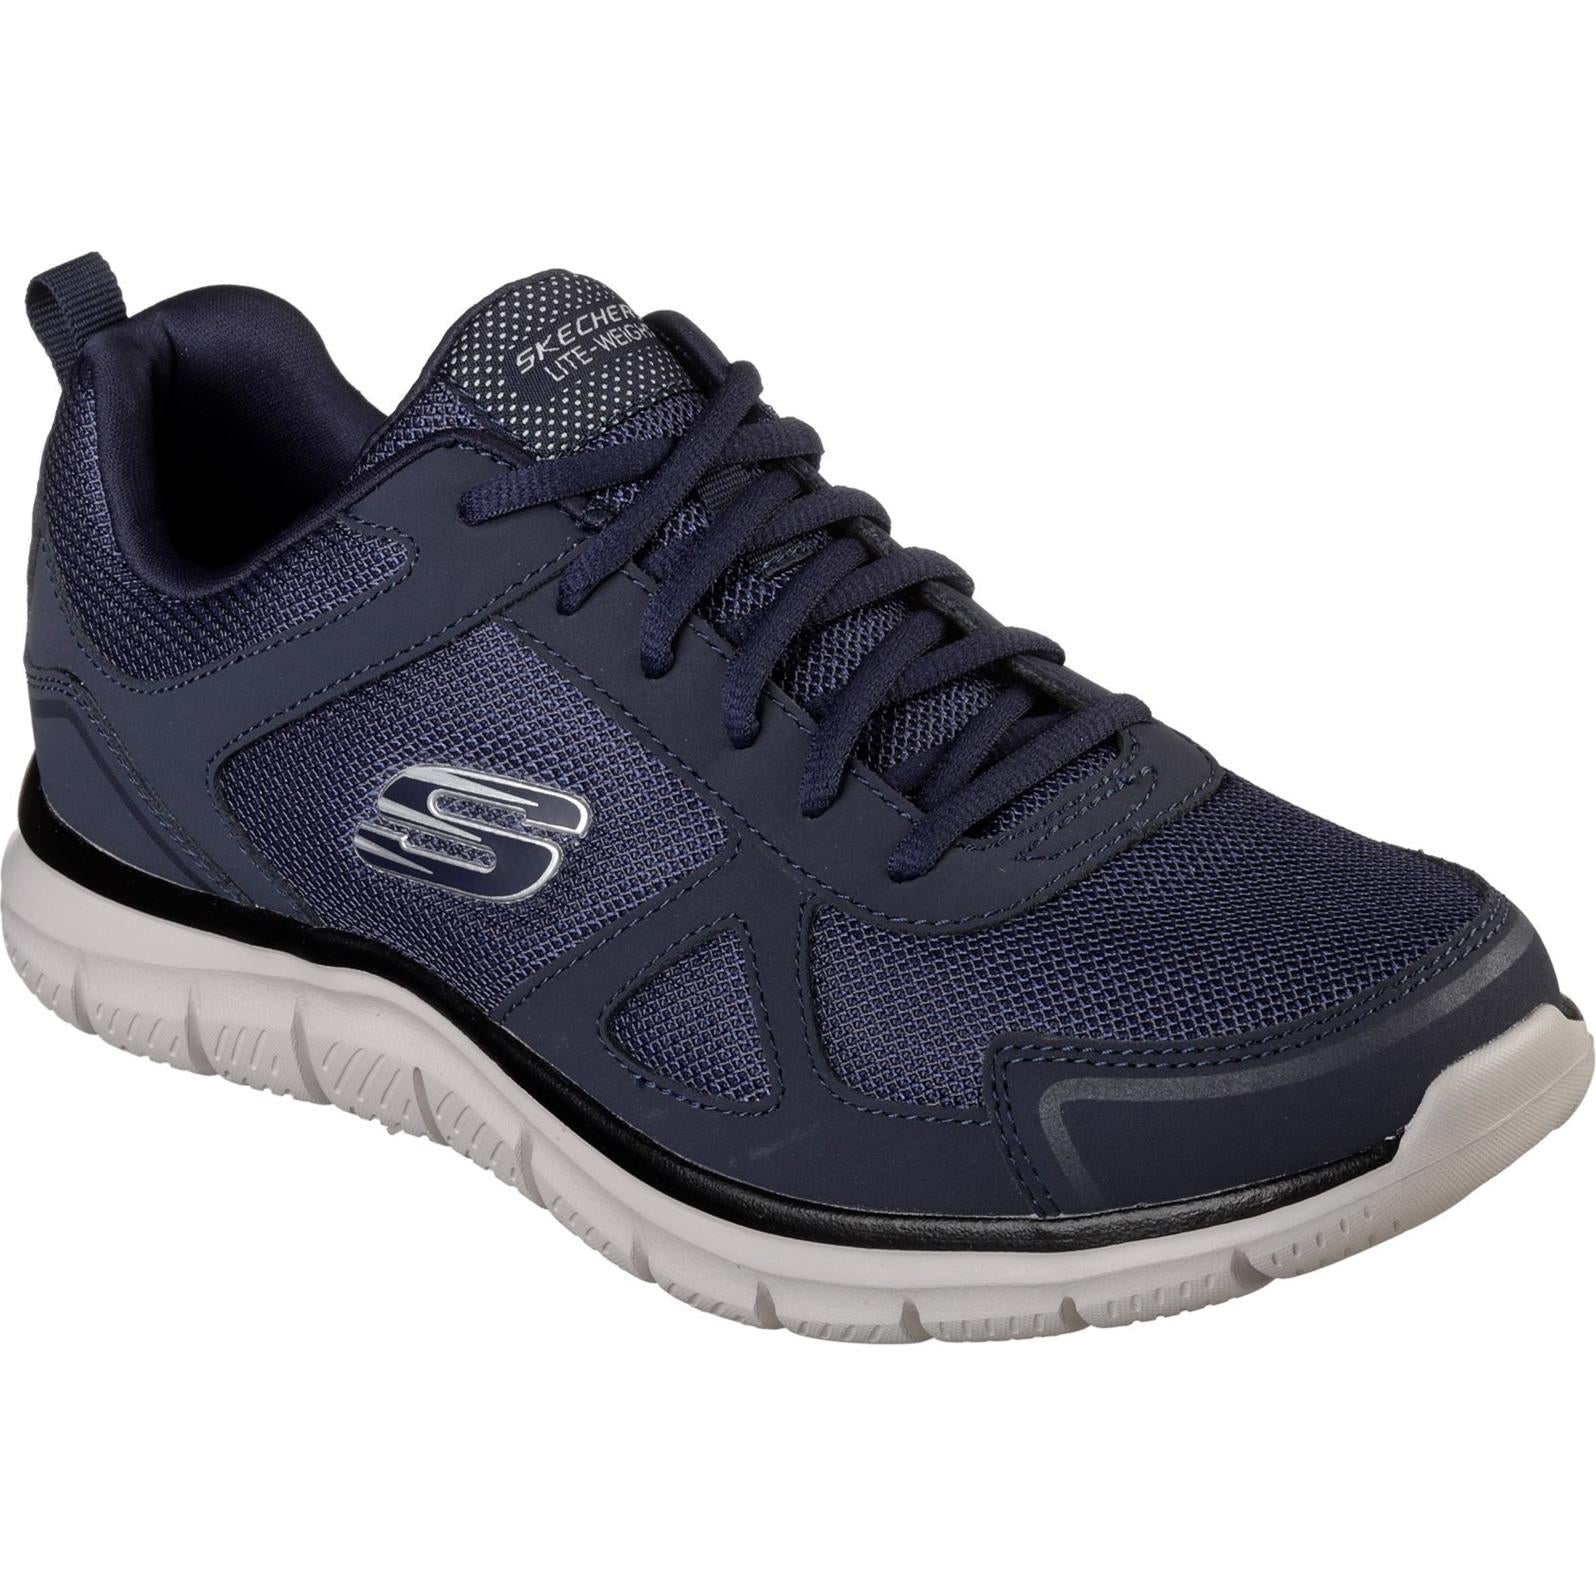 Skechers Track Scloric Sports Shoes